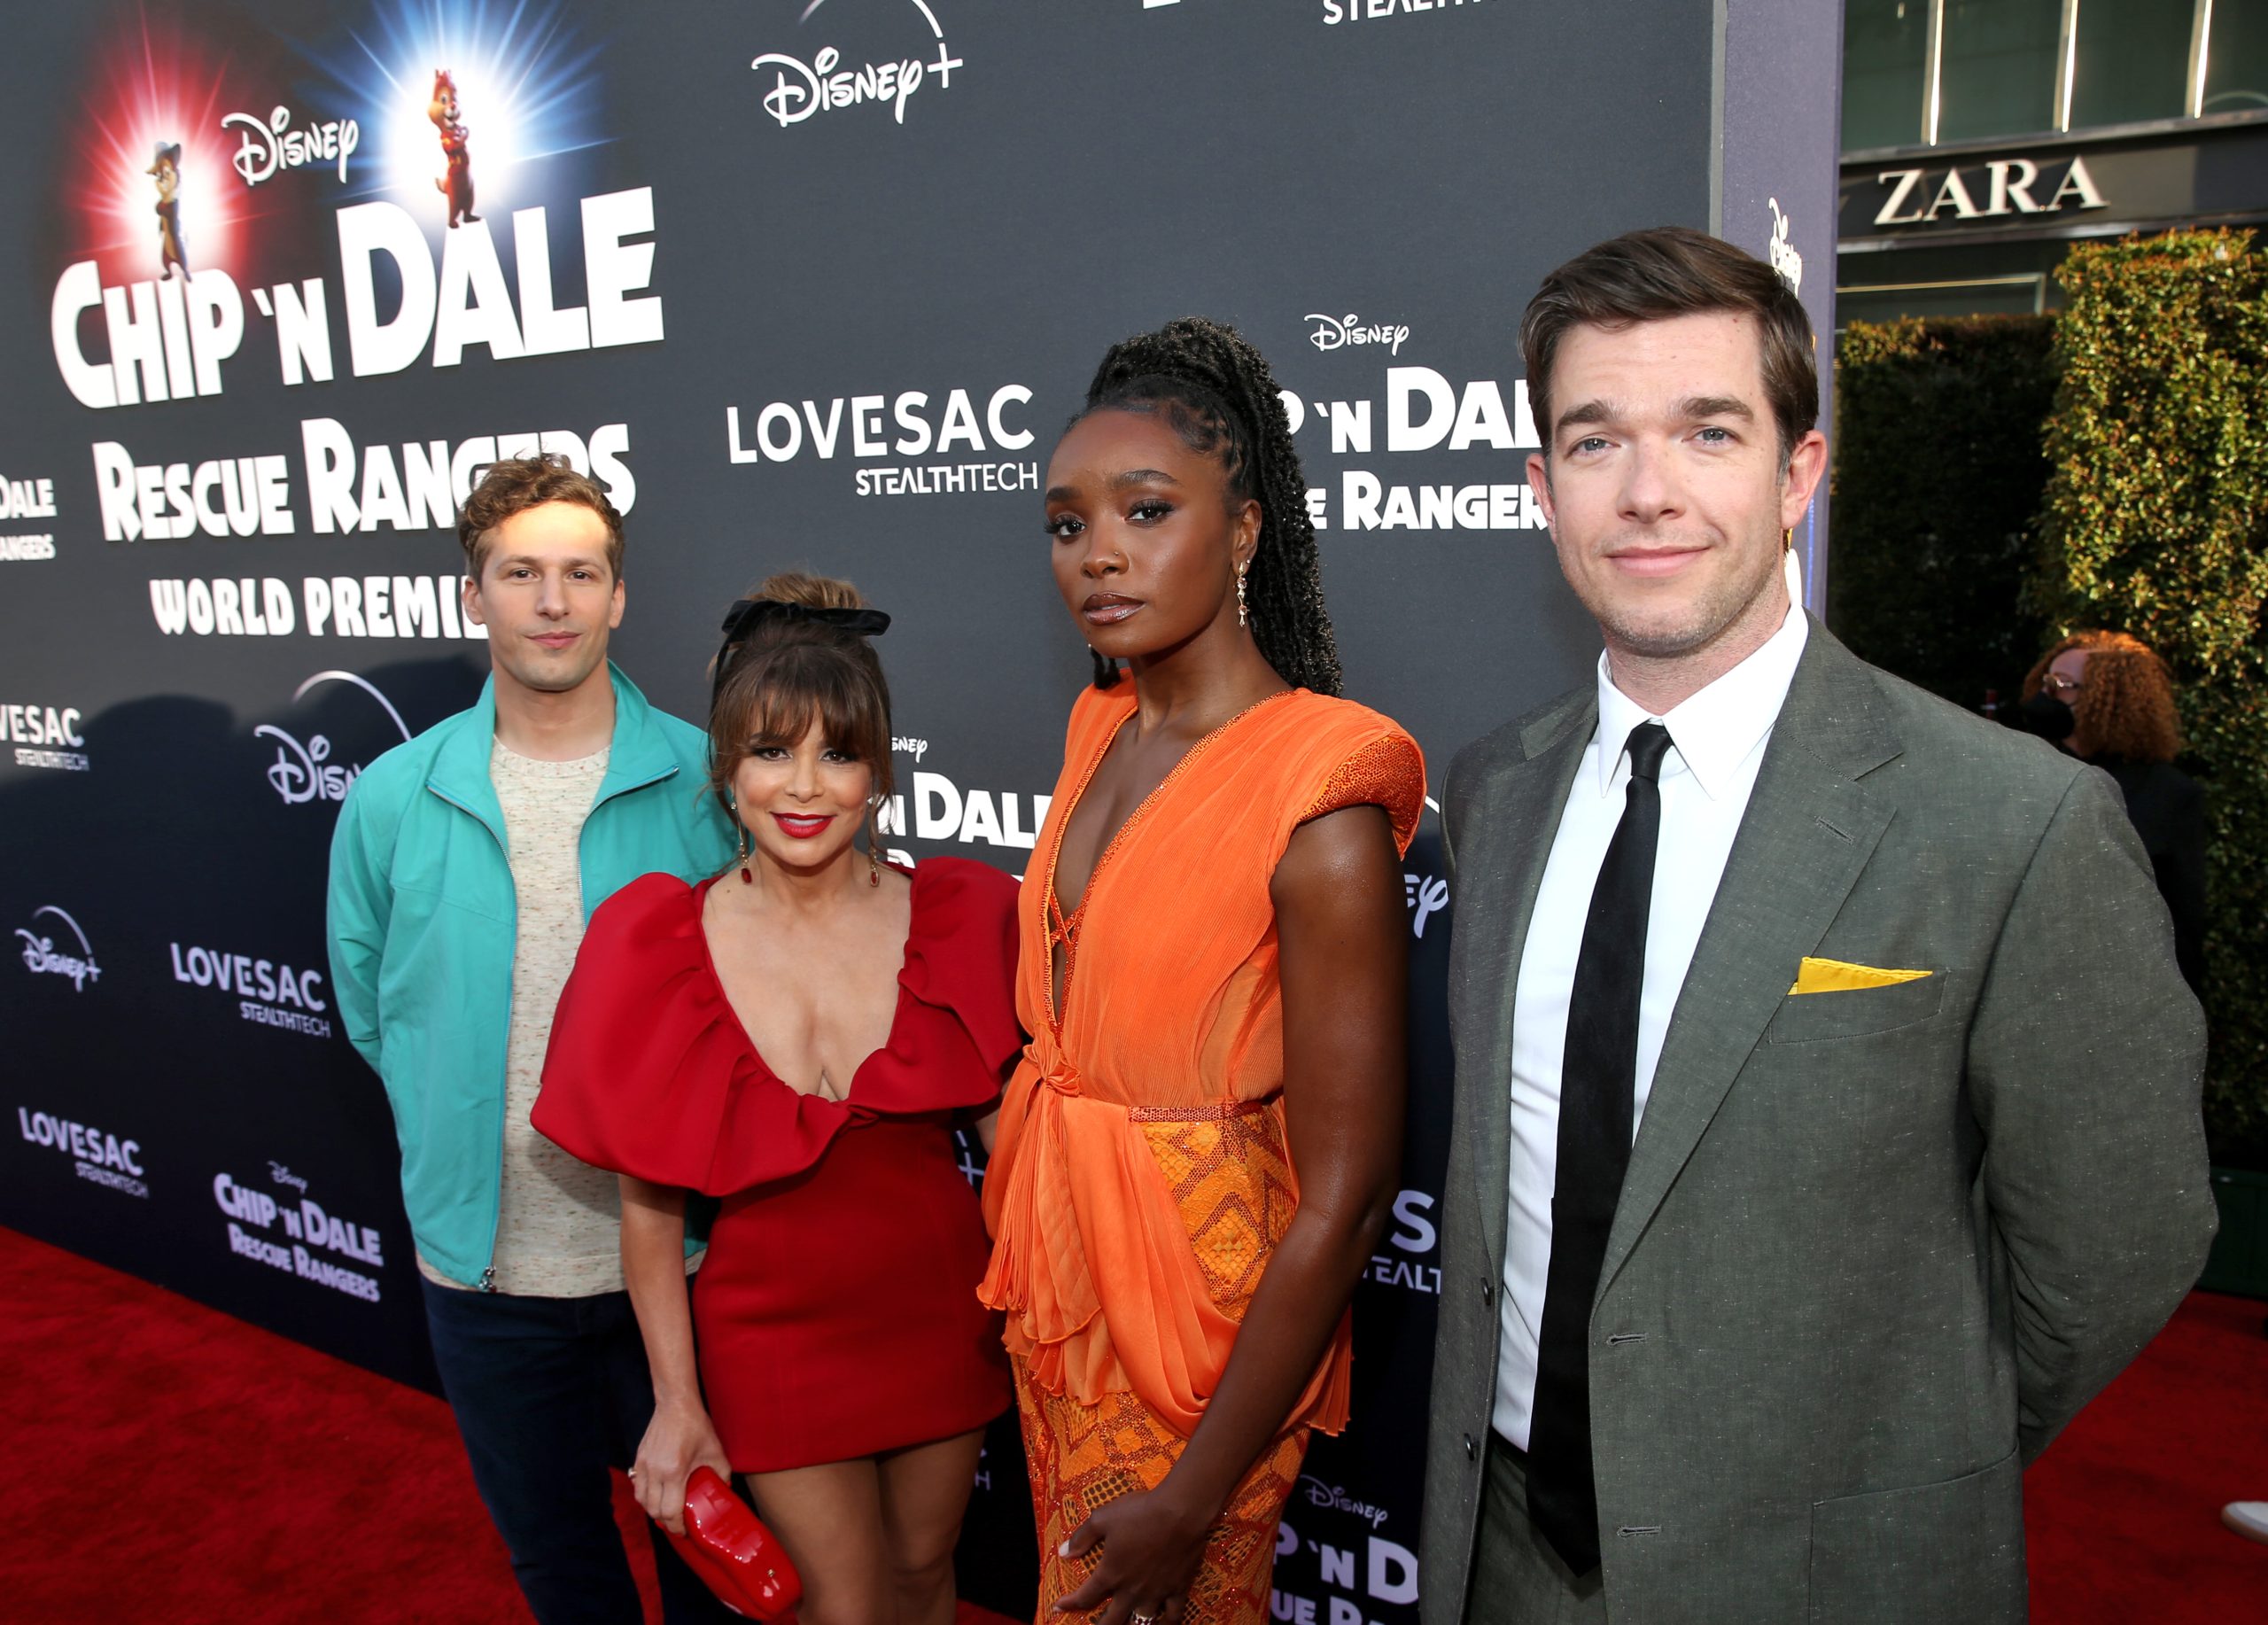 Red Carpet Rundown: “CHIP ‘N DALE: RESCUE RANGERS” Hollywood Premiere